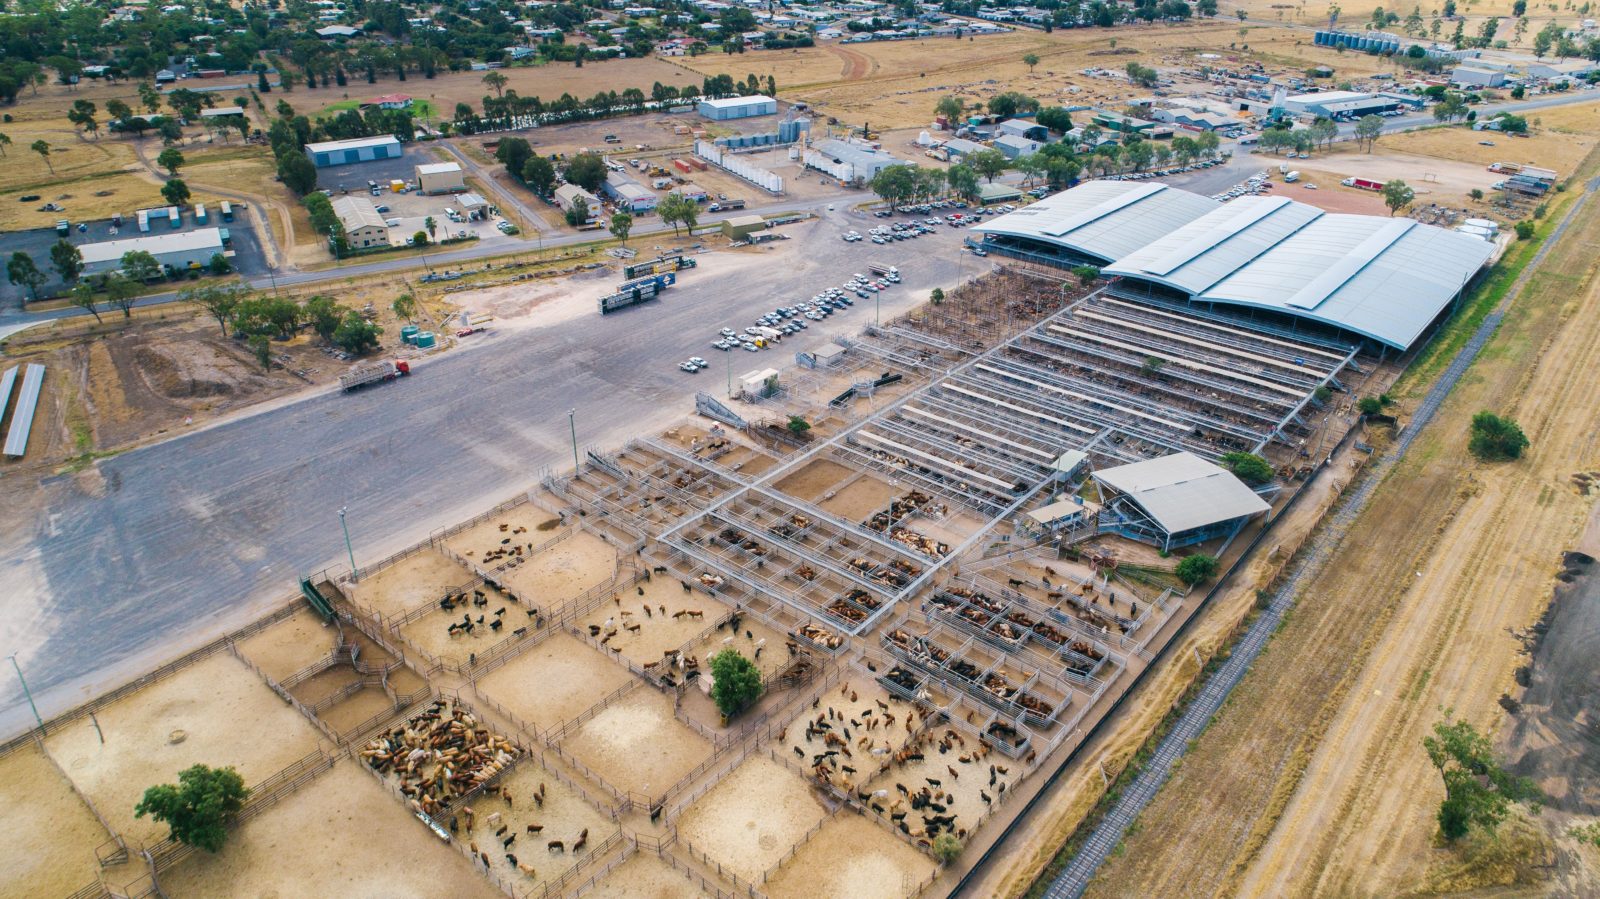 Great aerial image of the saleyards.